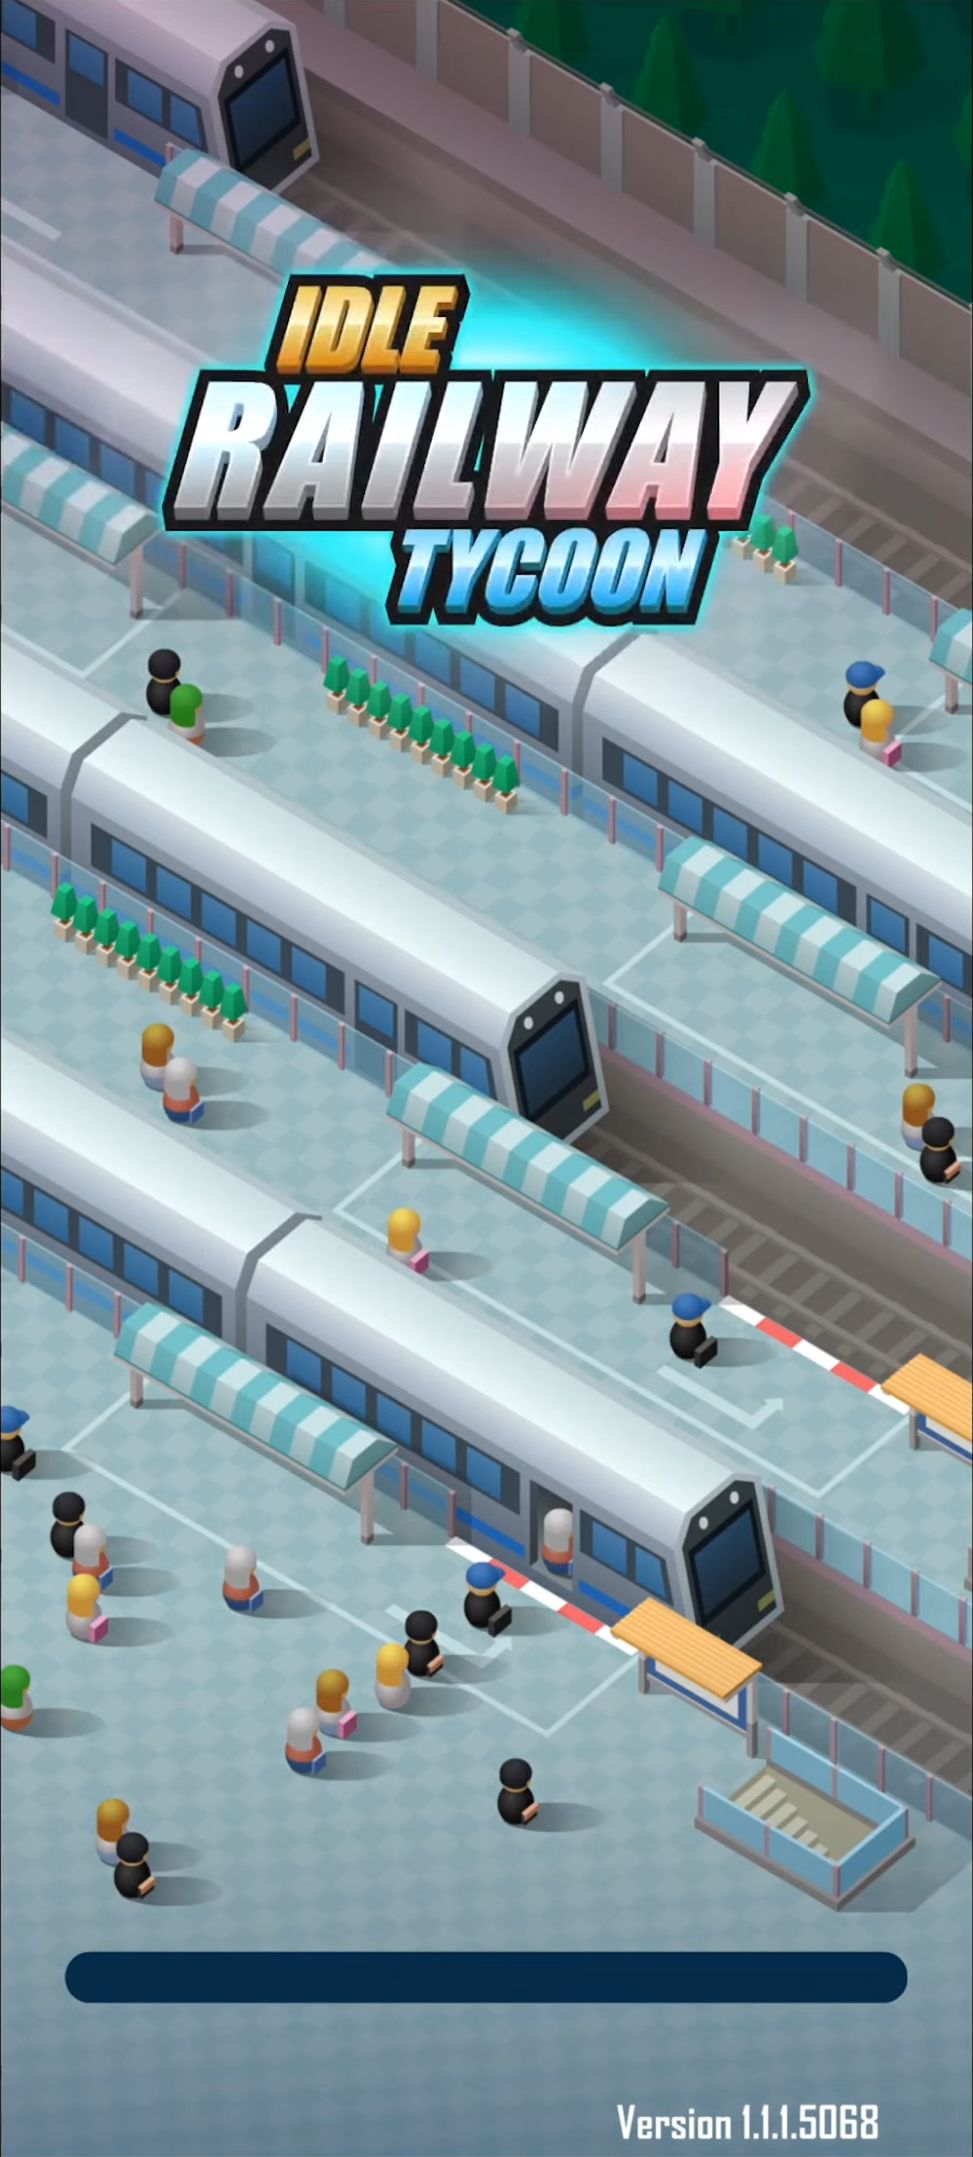 Full version of Android Trains game apk Idle Railway Tycoon for tablet and phone.